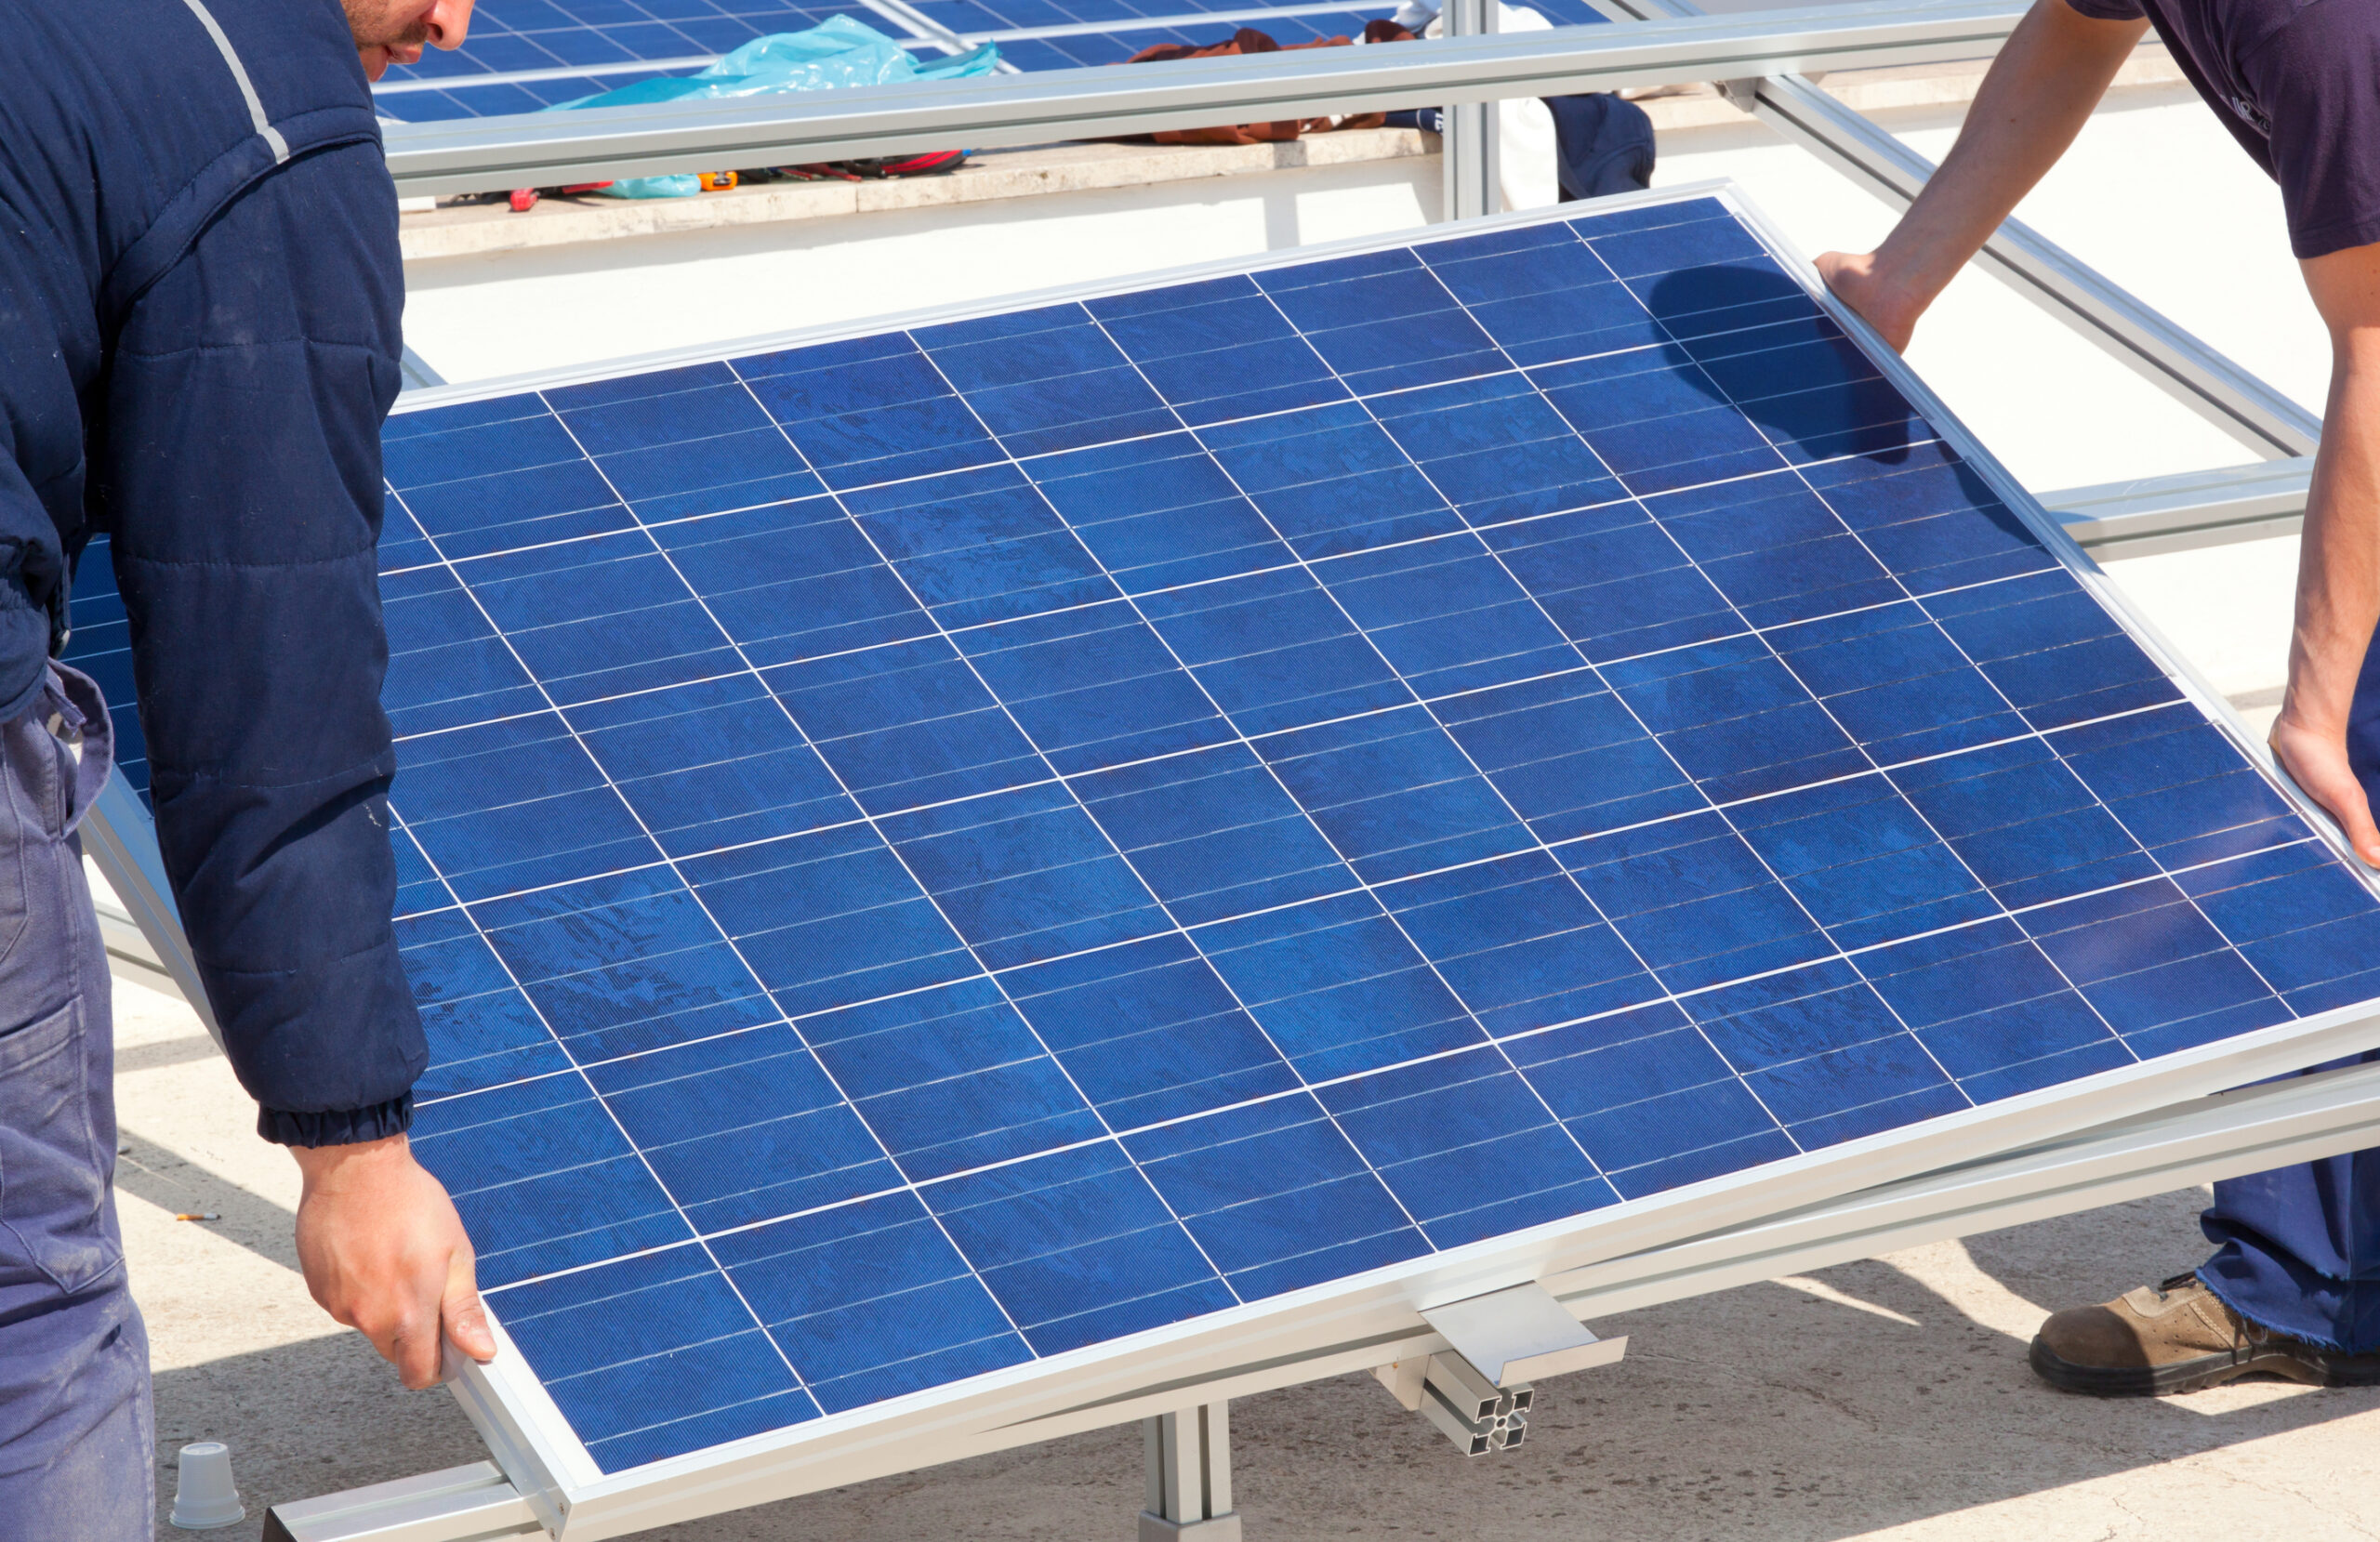 If the solar panels are of a considerable length or weight, then ensure a 2 (or more) person lift and carry.